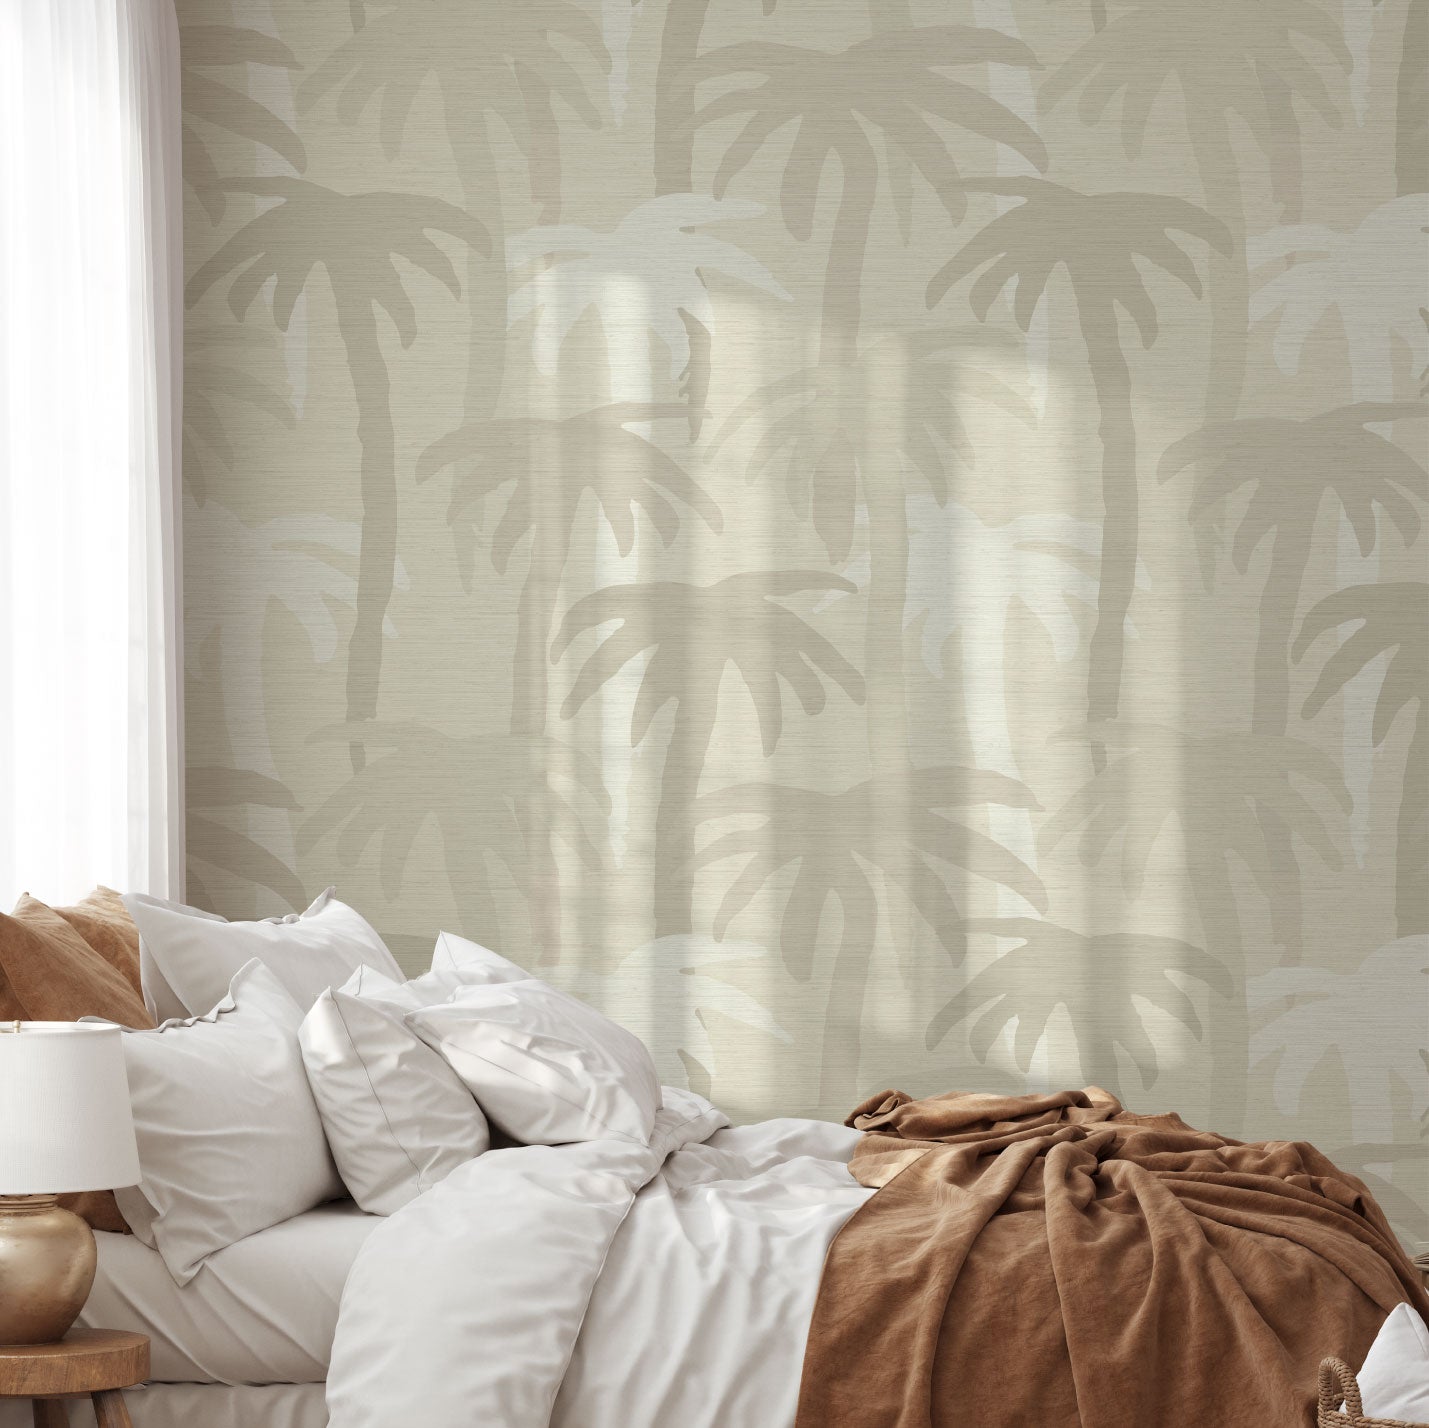 grasscloth printed wallpaper on a tan, sand colored base with shades of tan, light brown, beige and white single colored palm trees overlapped to form a linear palm print inspired by late 1980s and early 1990s Southern California Surf graphics